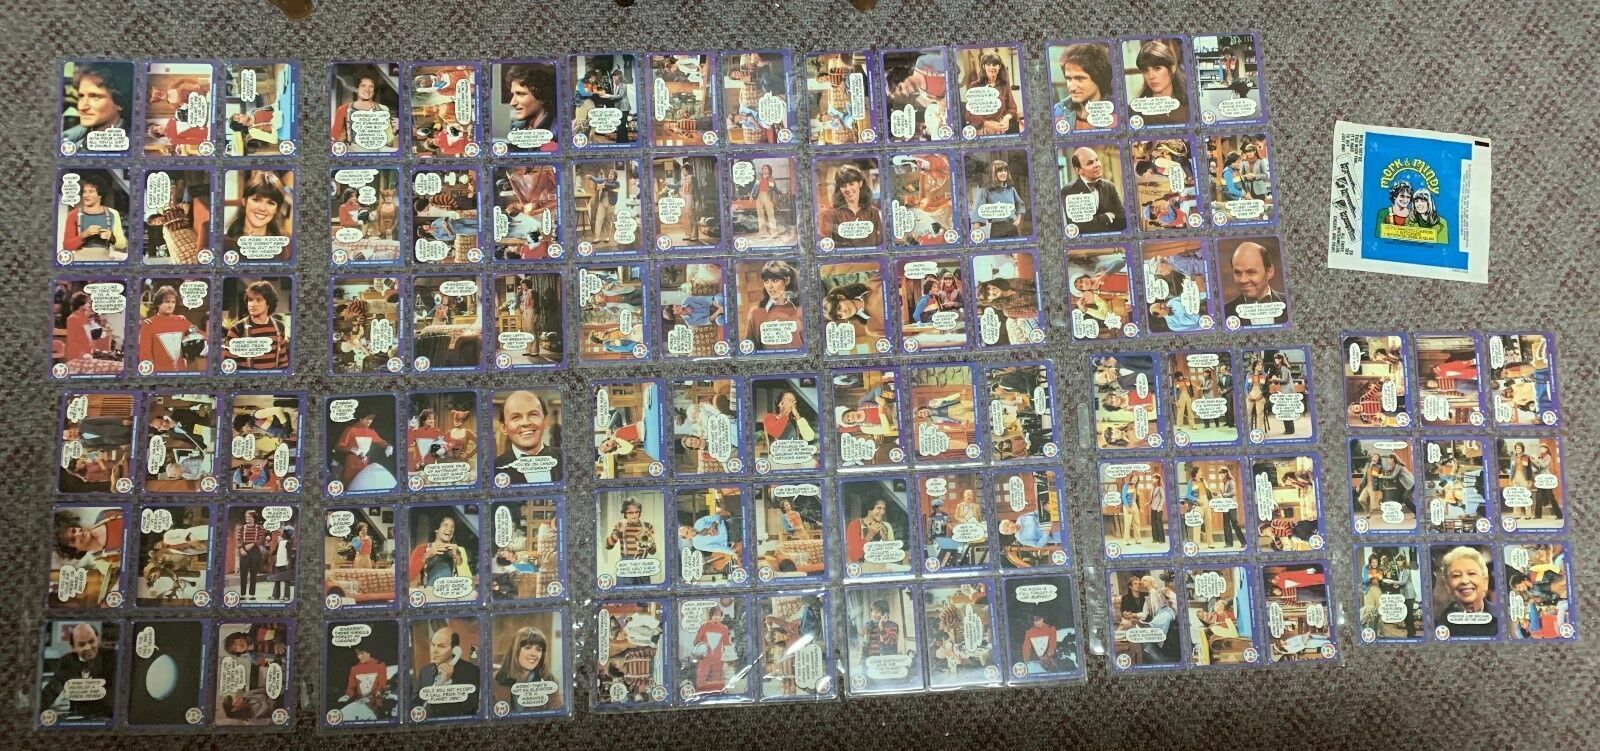 1978 Mork and Mindy Topps Base/Common Cards U-PICK Flat Rate Ship Per Card .99